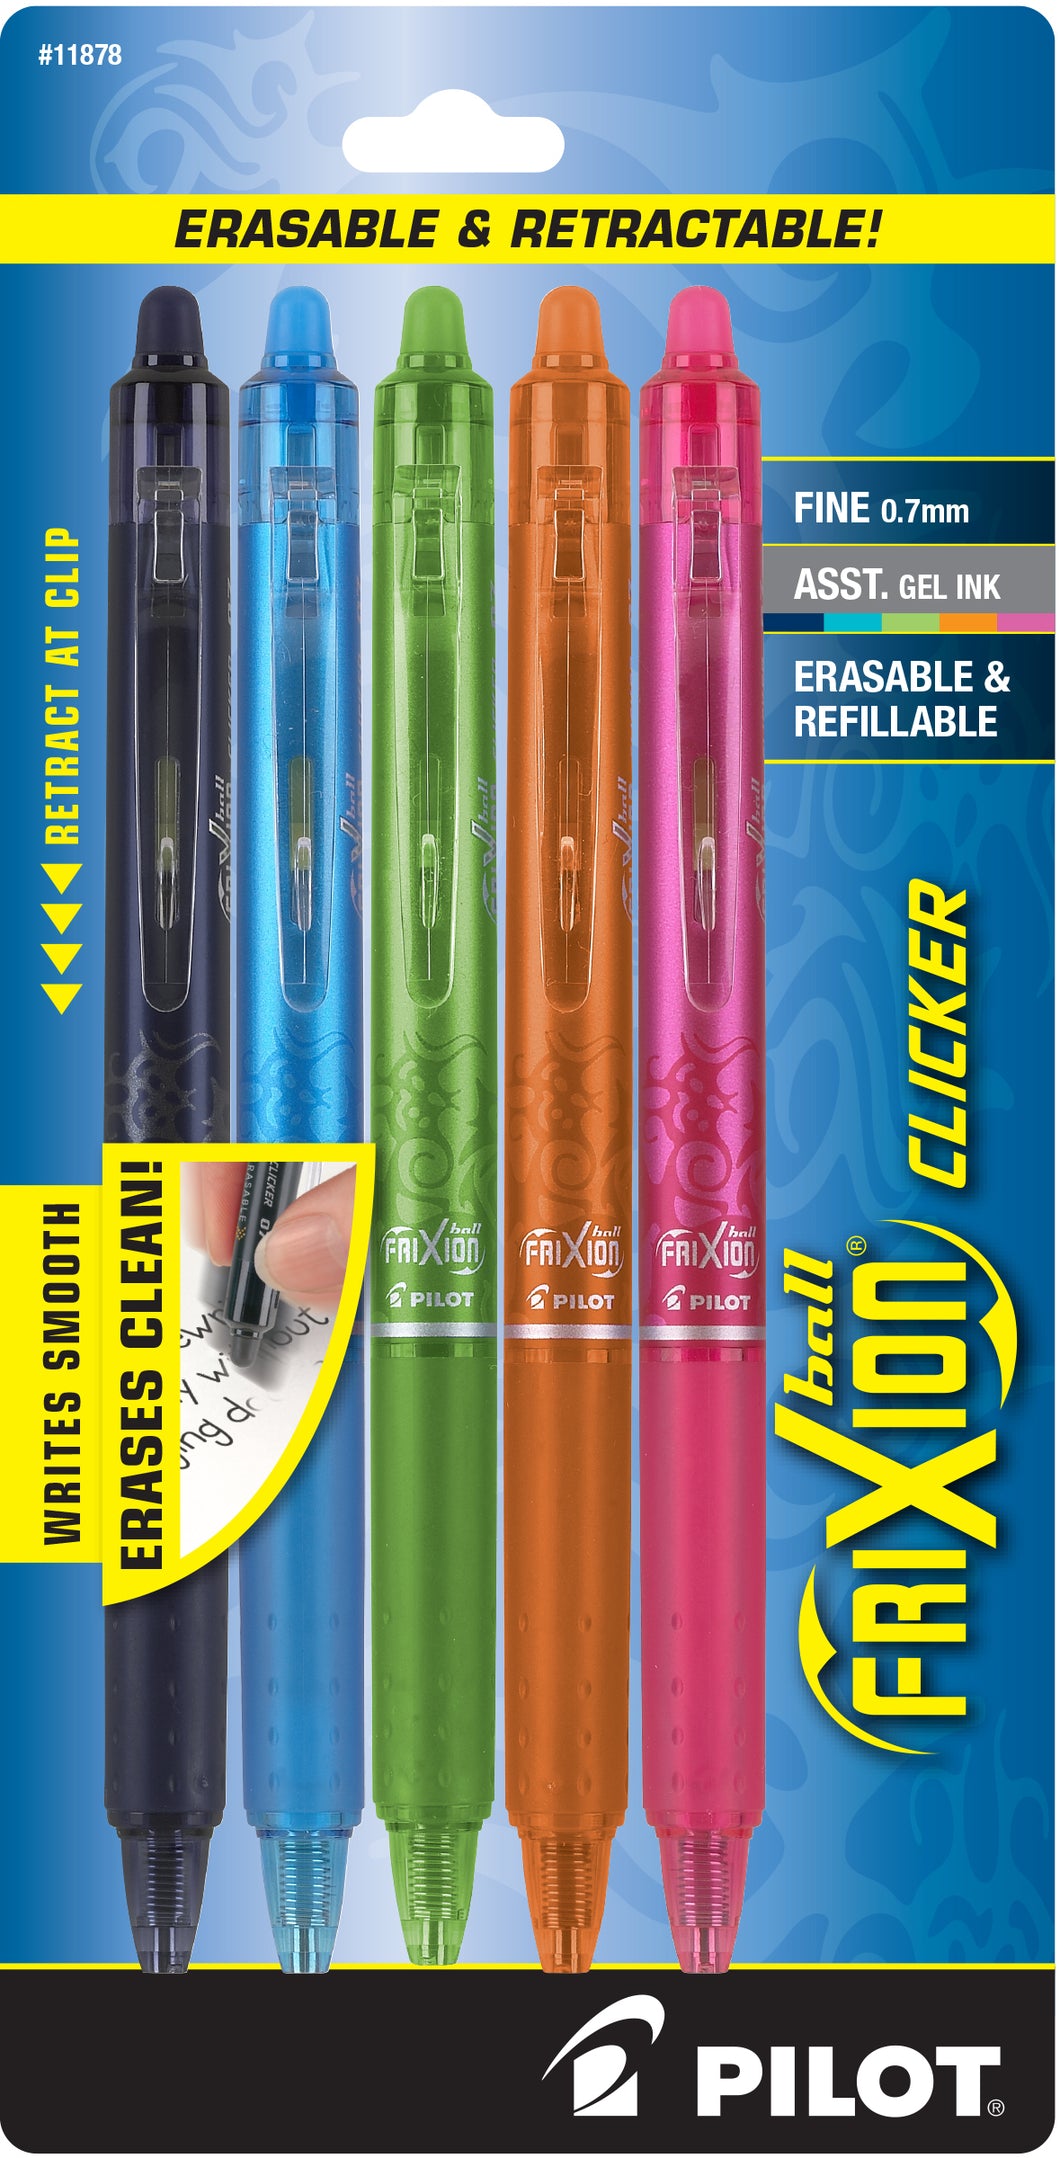 Pilot Frixion Clicker Erasable Pen with Navy, Turquoise, Lime, Orange, and Pink Gel Ink. 5pk 0.7mm